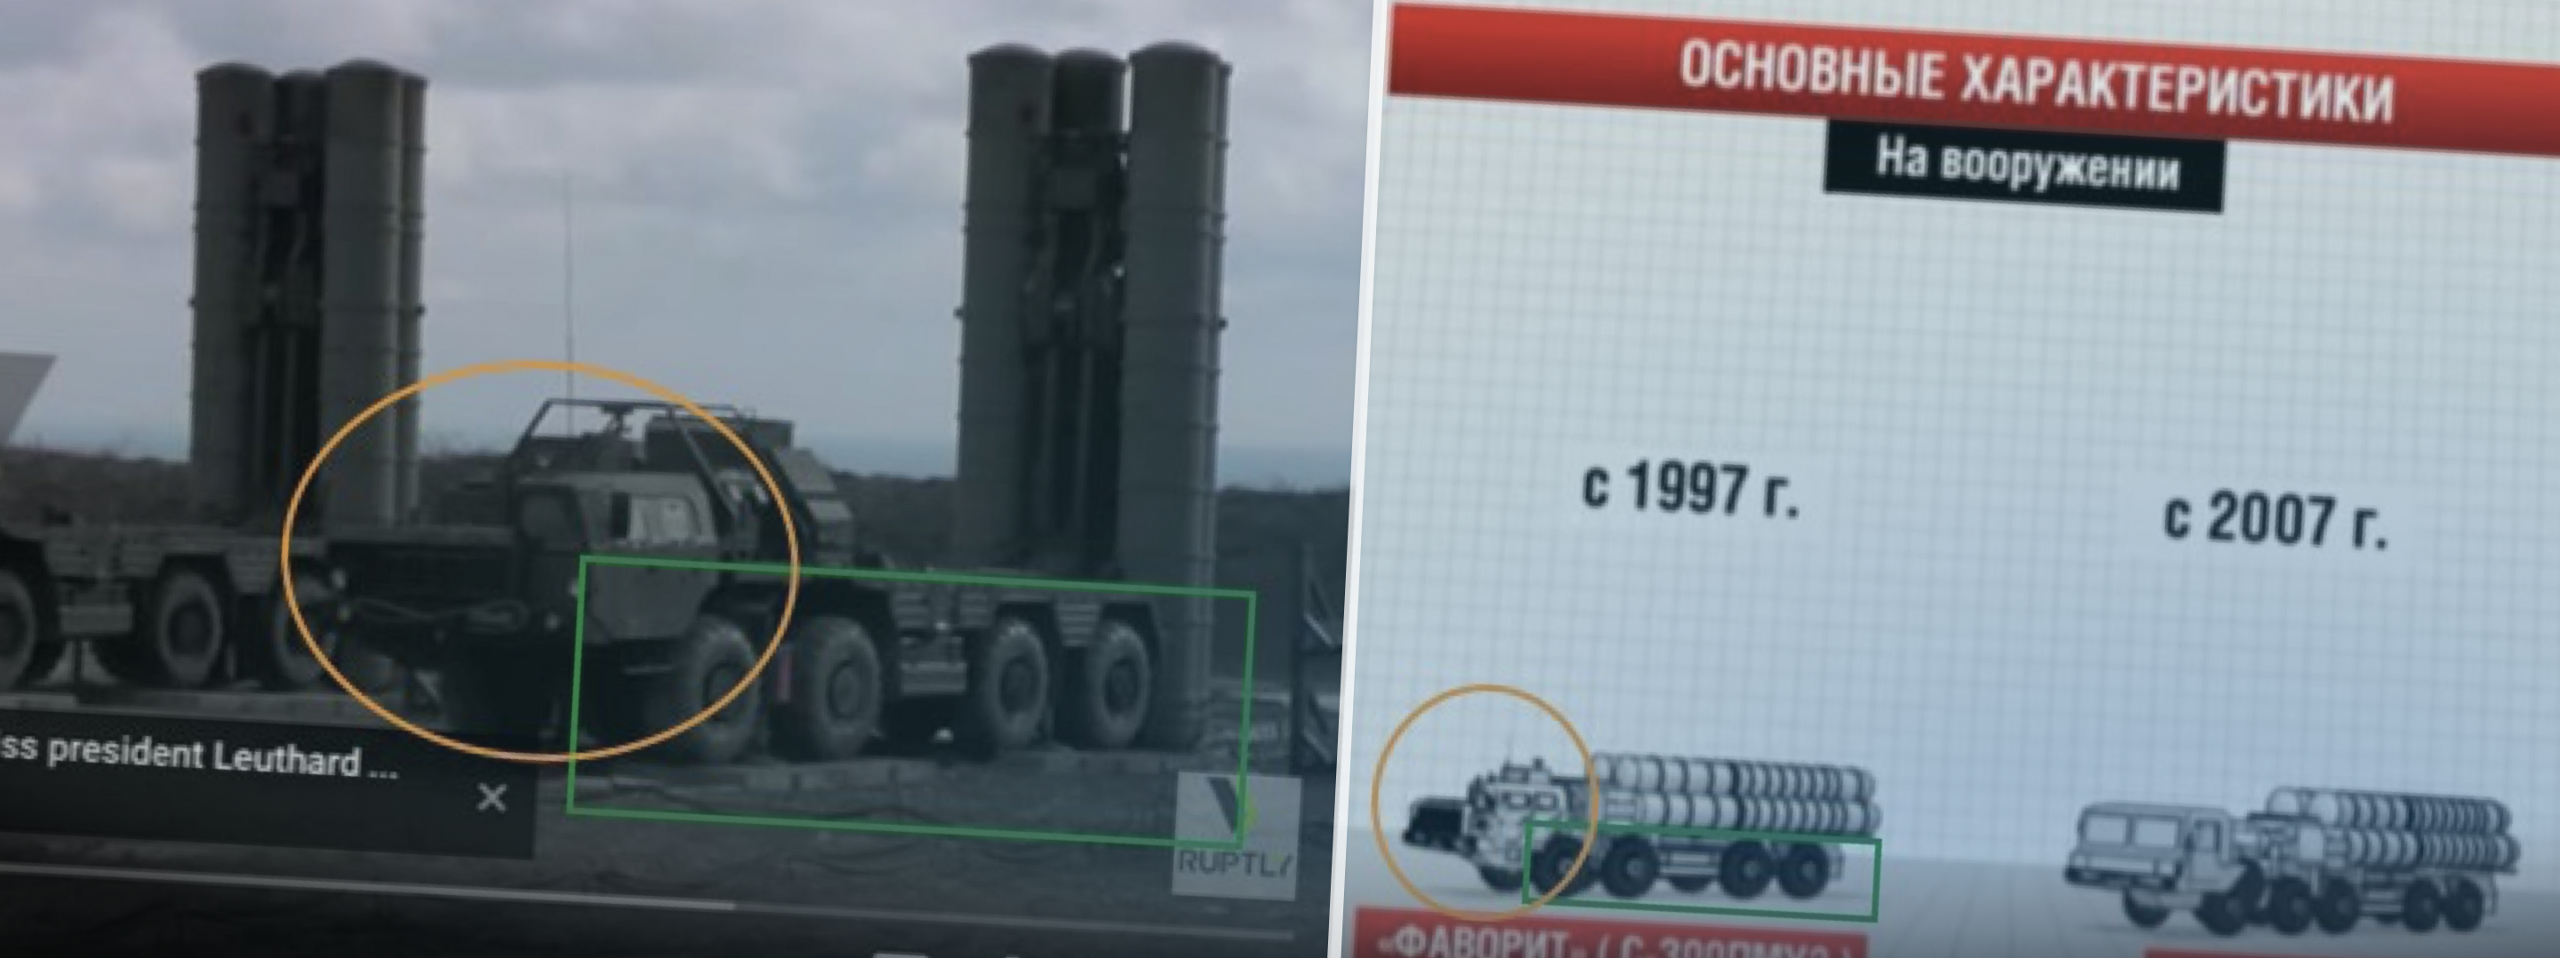 New Missiles for Old?